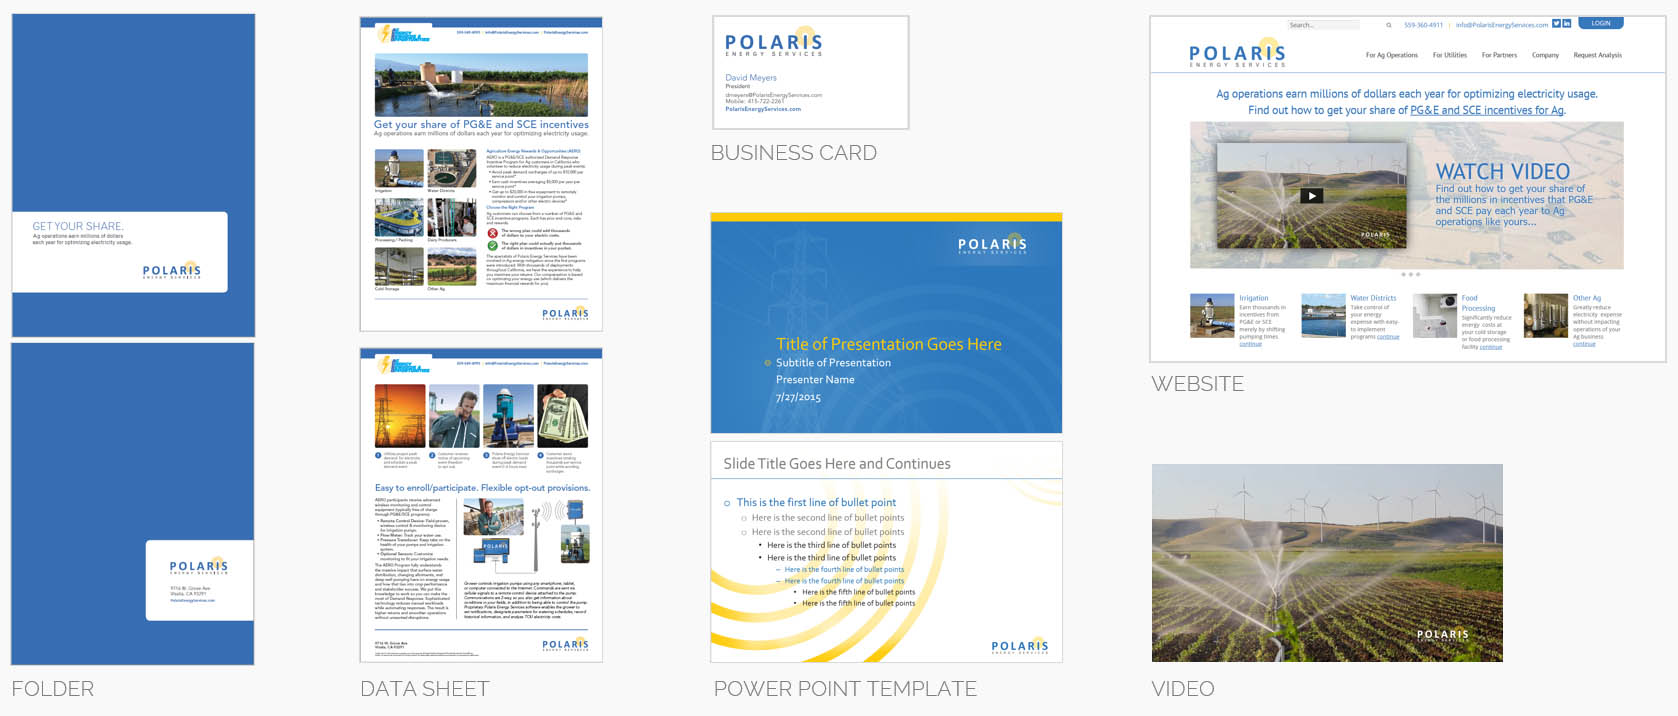 image-852429-Polaris-Energy-Services-Branding-Collateral-Trade-Show-Website-c9f0f.jpg